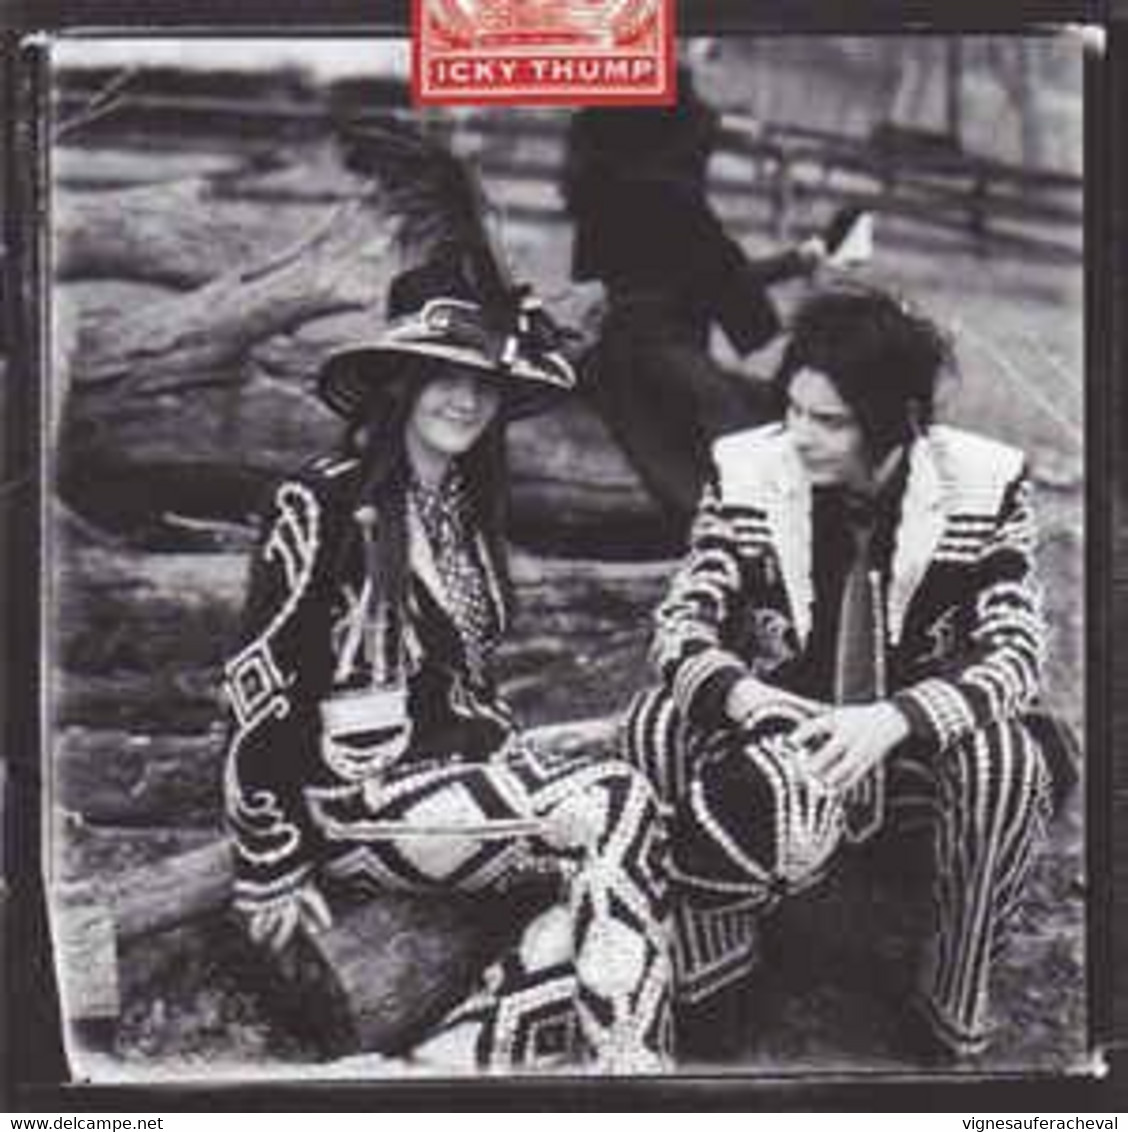 The White Stripes - Icky Thump Cd - Other - English Music